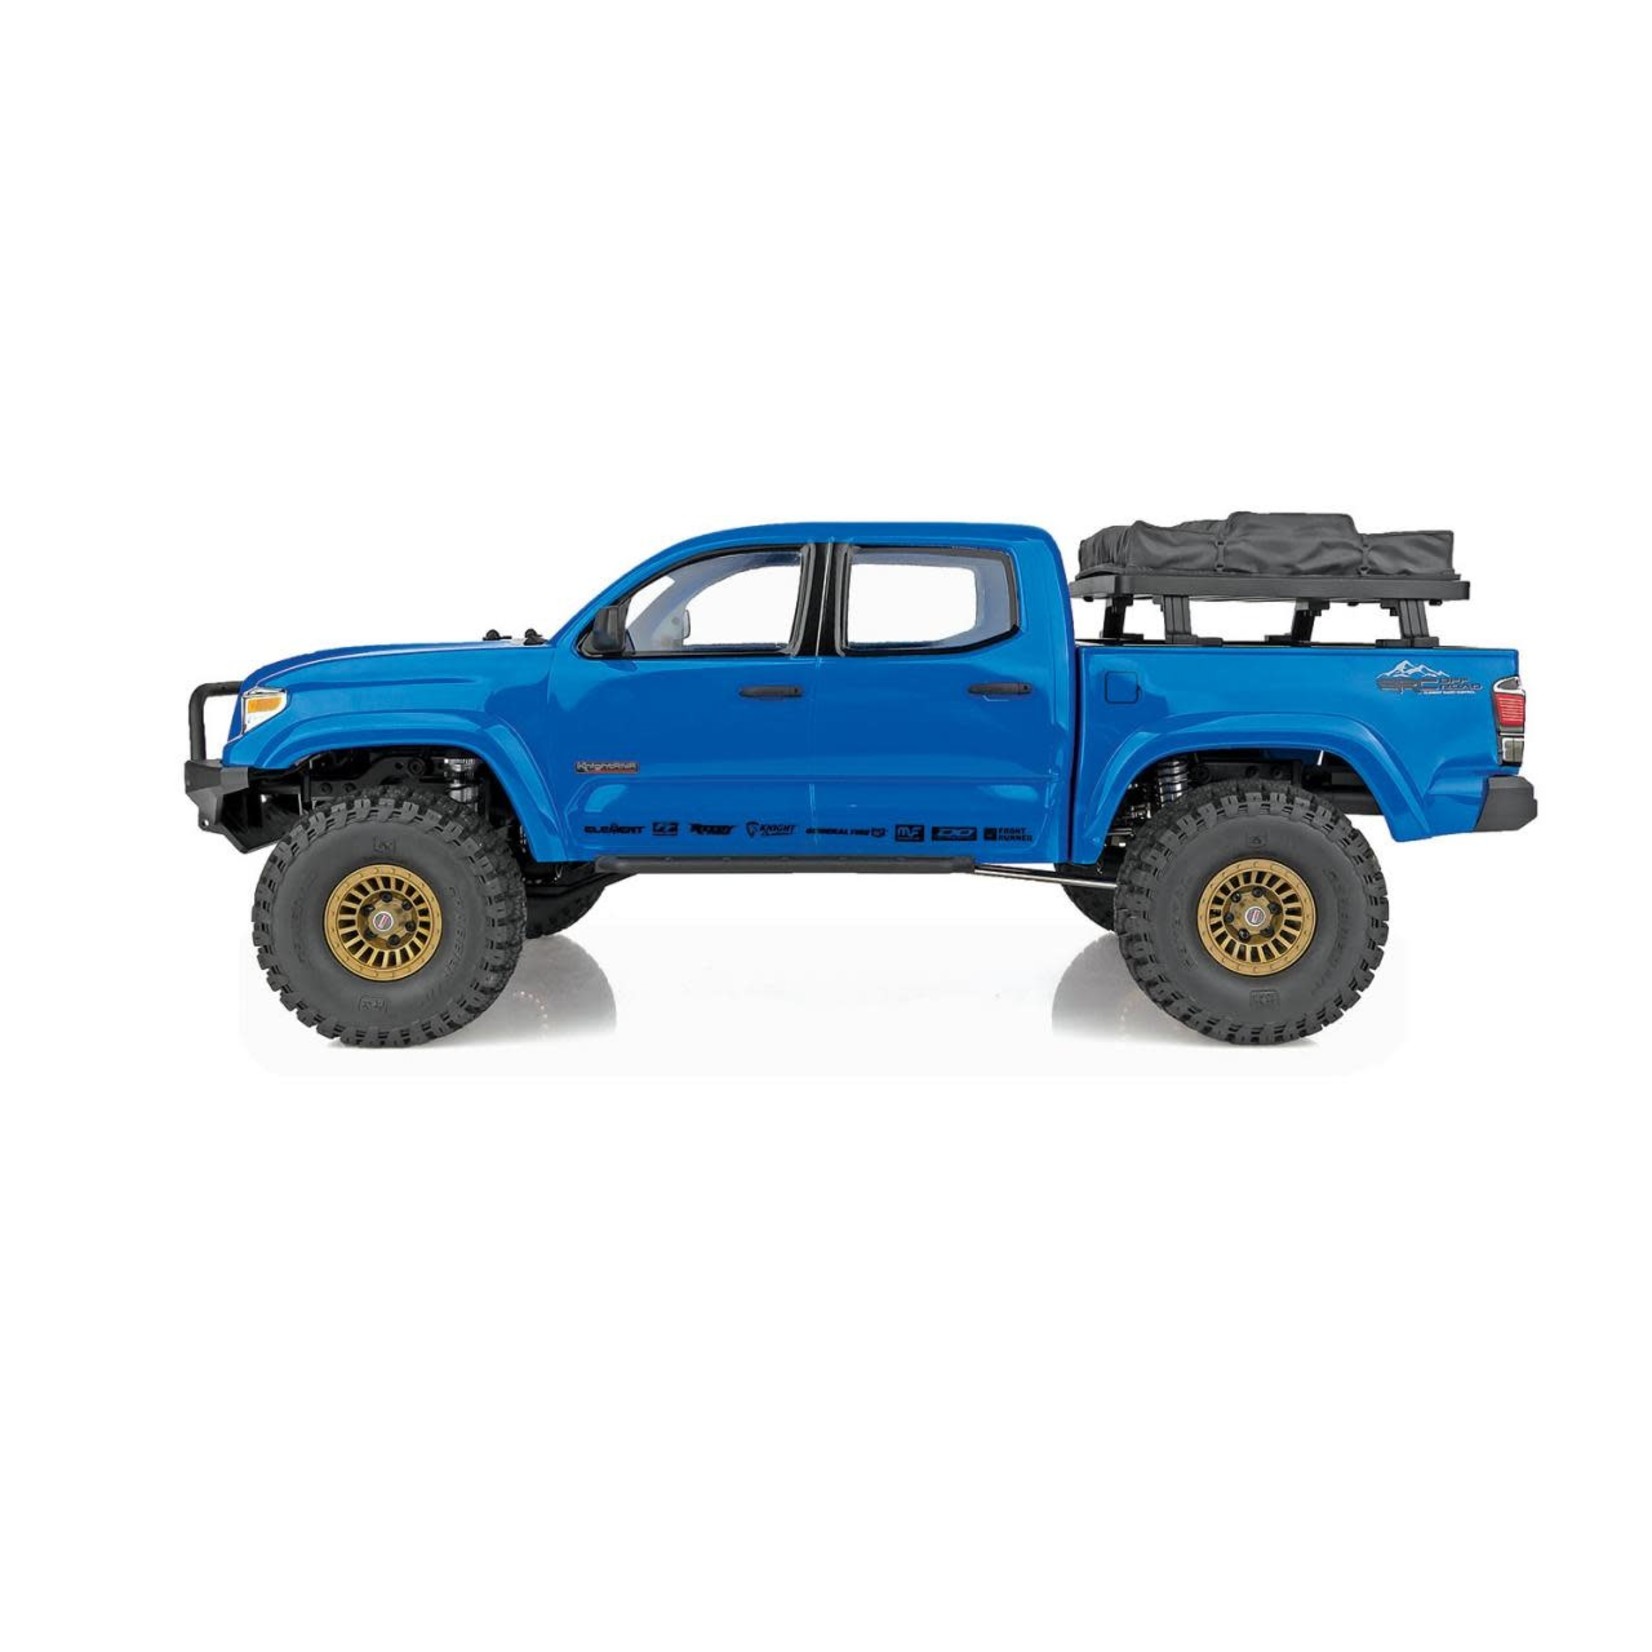 ELEMENT RC Enduro Knightrunner 1/10 Off-Road Electric 4WD RTR Trail Truck, Blue